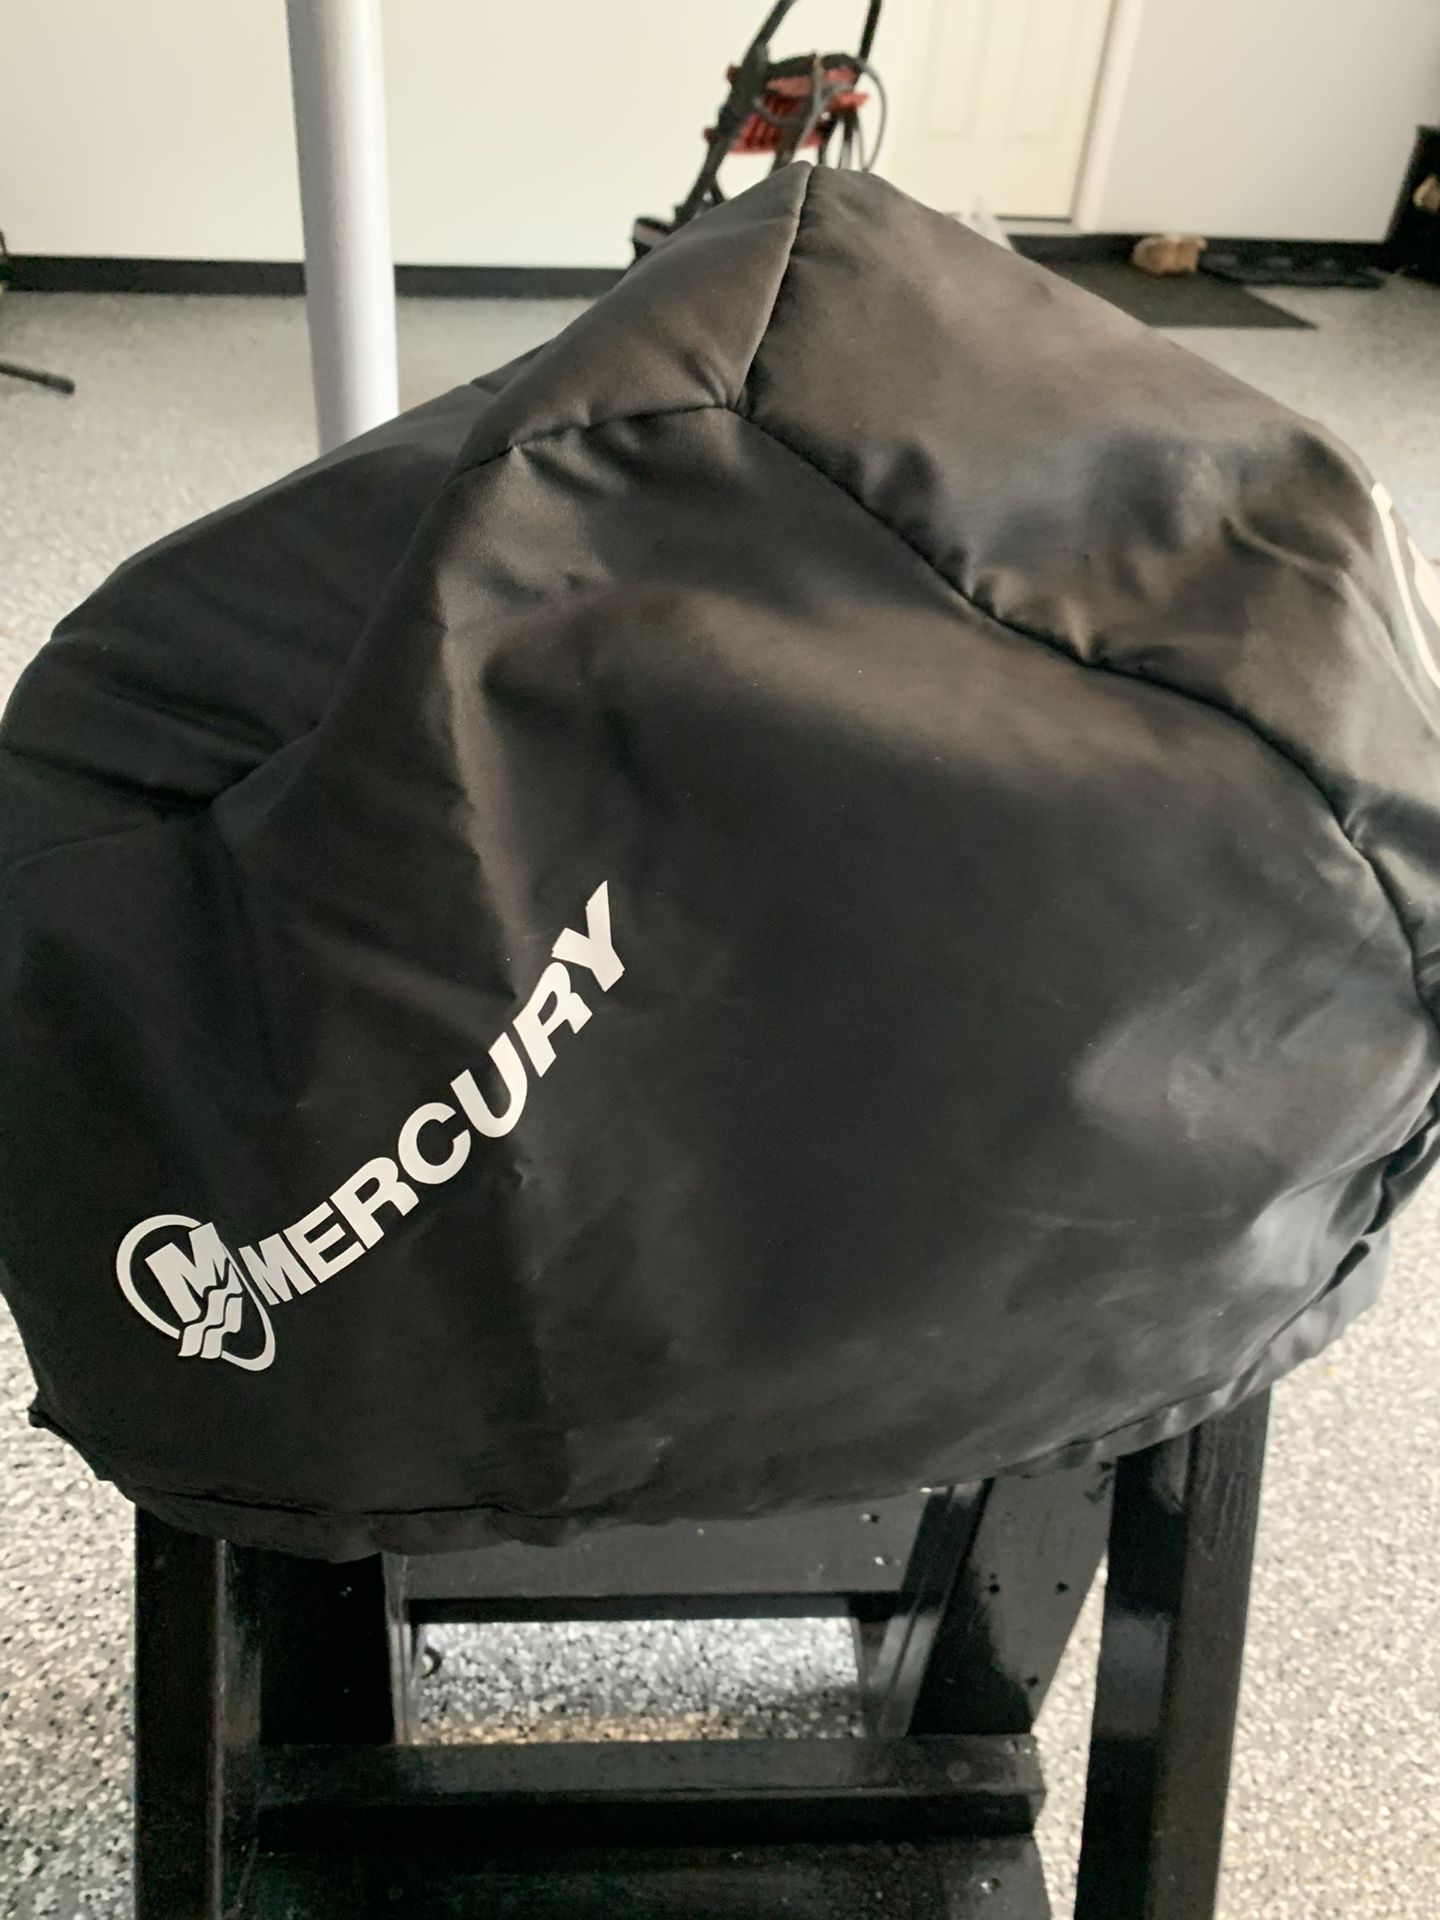 Mercury Boat Cover Up To 35 HP Brad New/ Stand Boat Motor Holds Up To 45 HP, $120 Cash